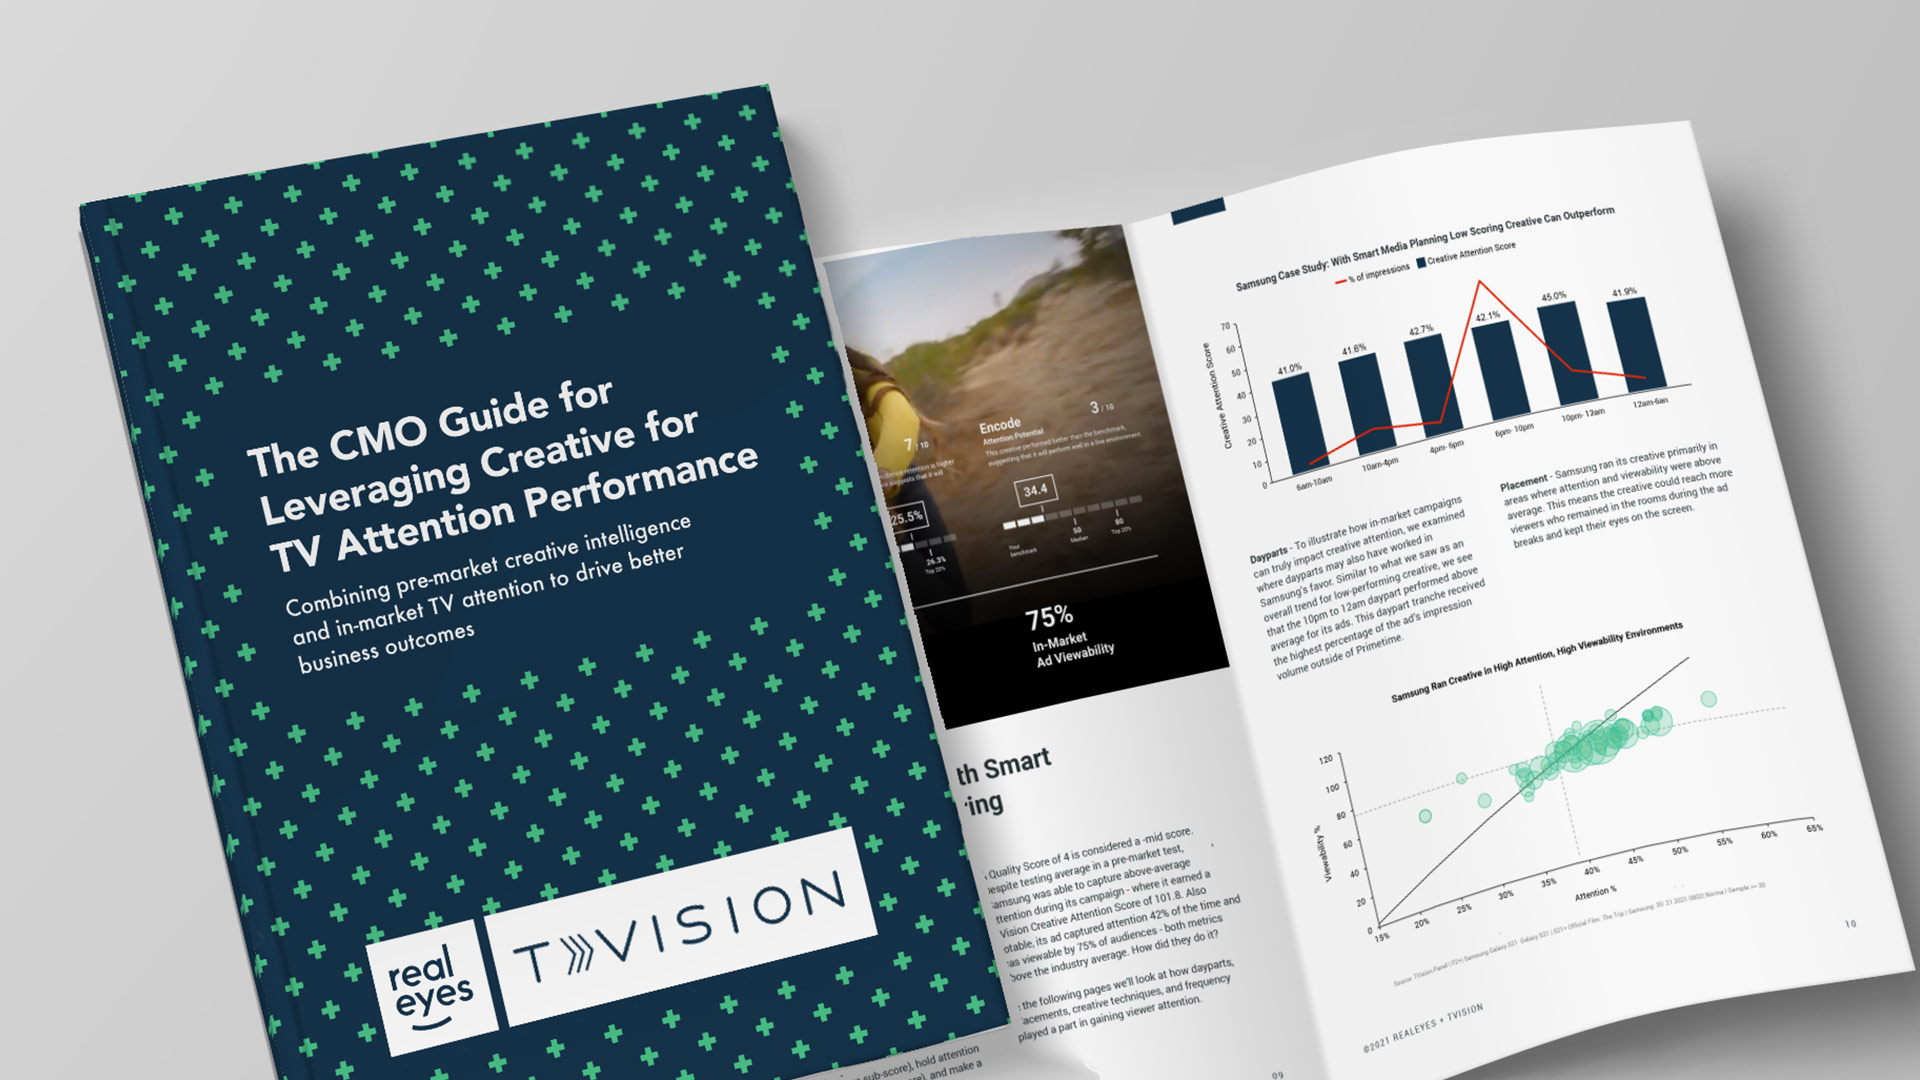 The CMO Guide: Improving Media Efficiency Through Creative Attention